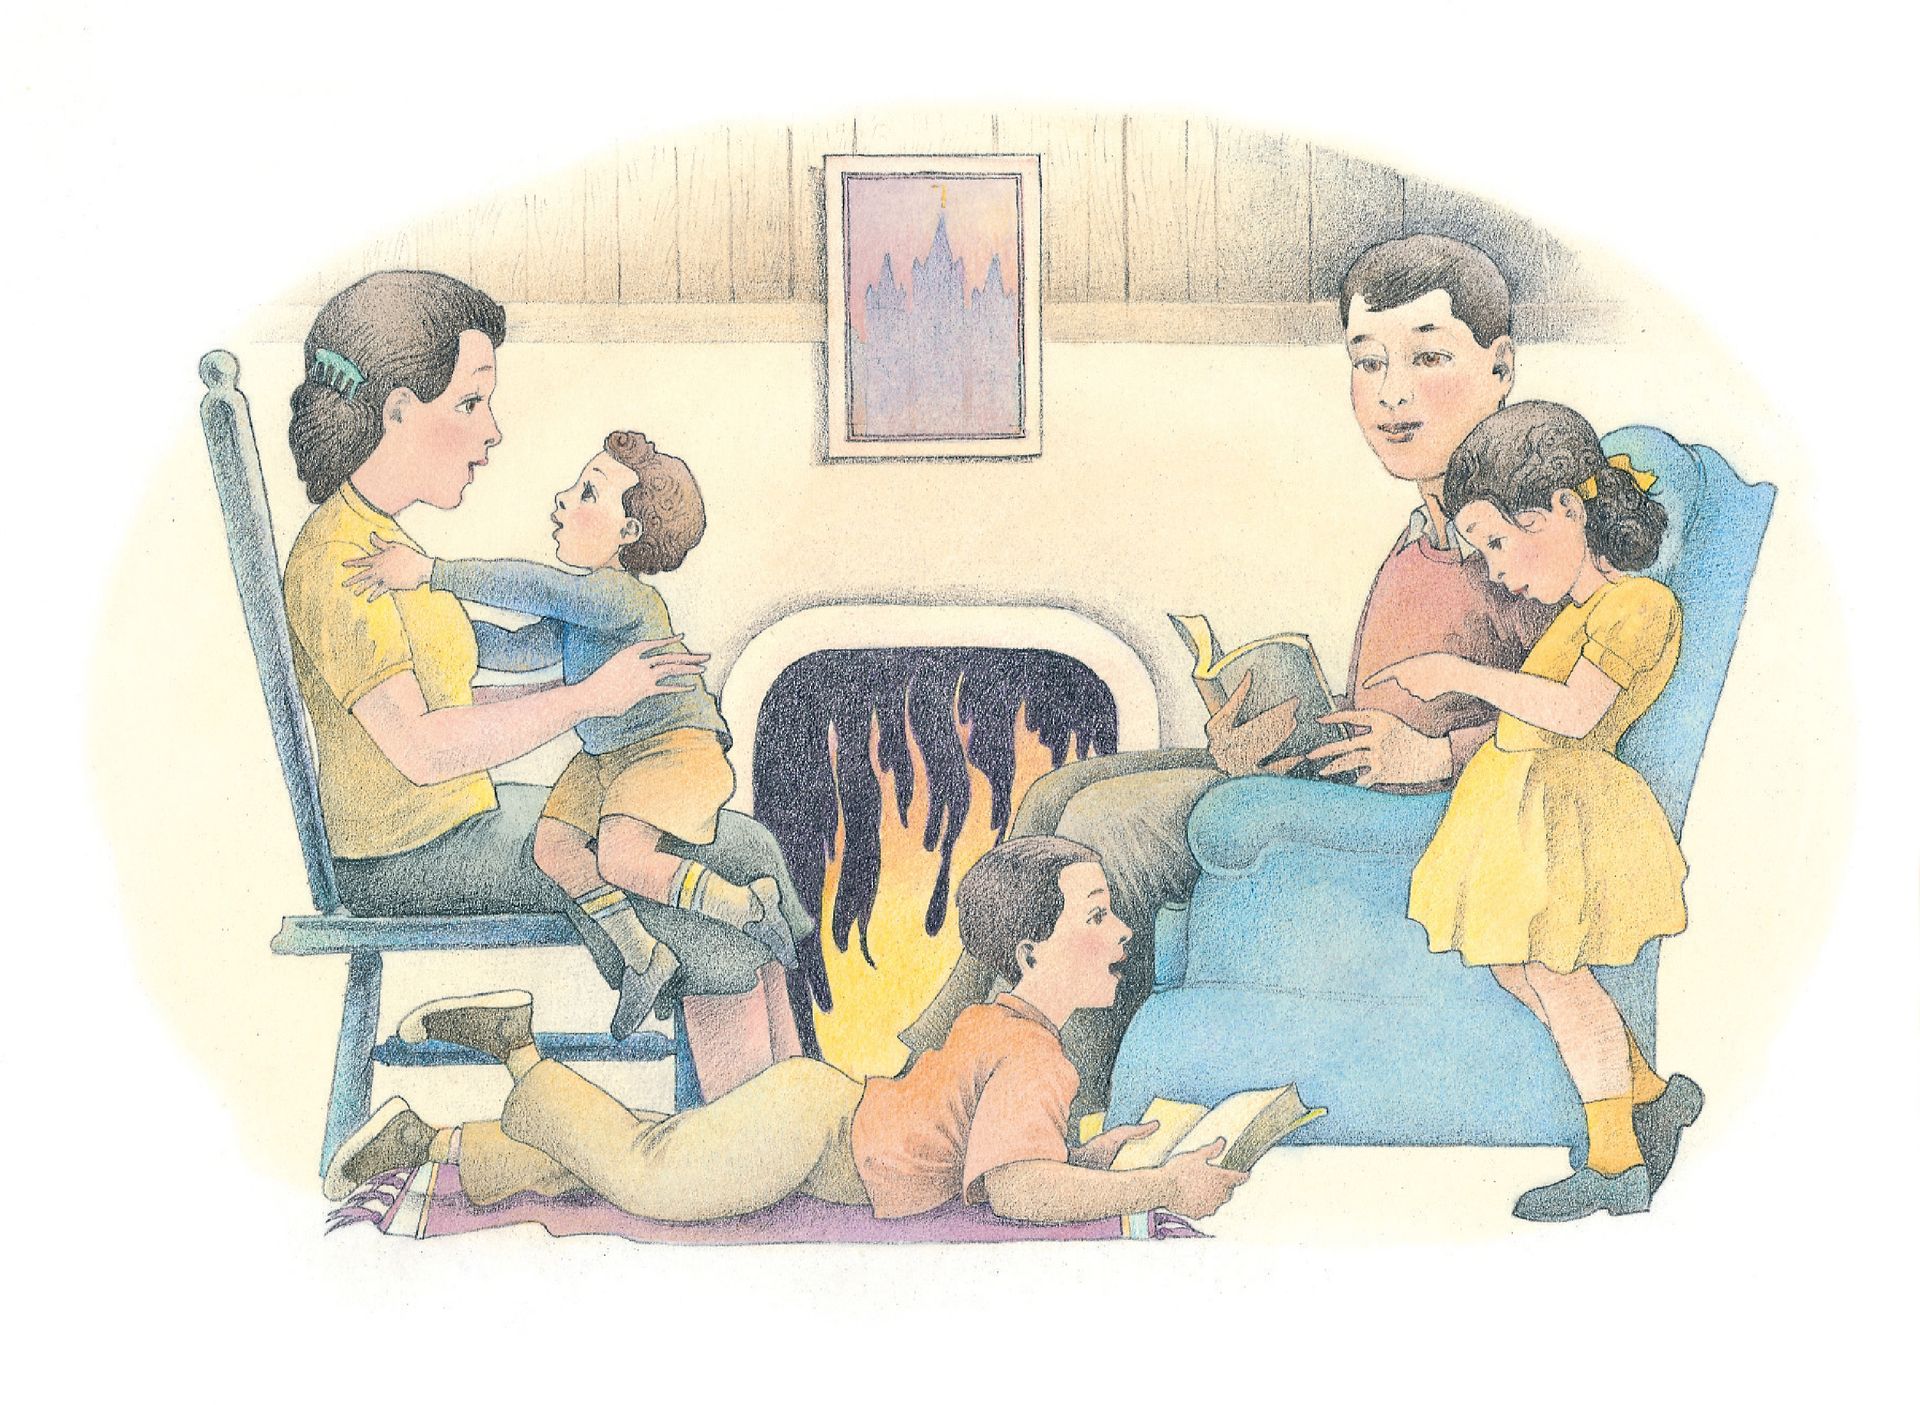 A family of five sitting around the fire, reading books and interacting. From the Children’s Songbook, page 192, “Home”; watercolor illustration by Richard Hull.